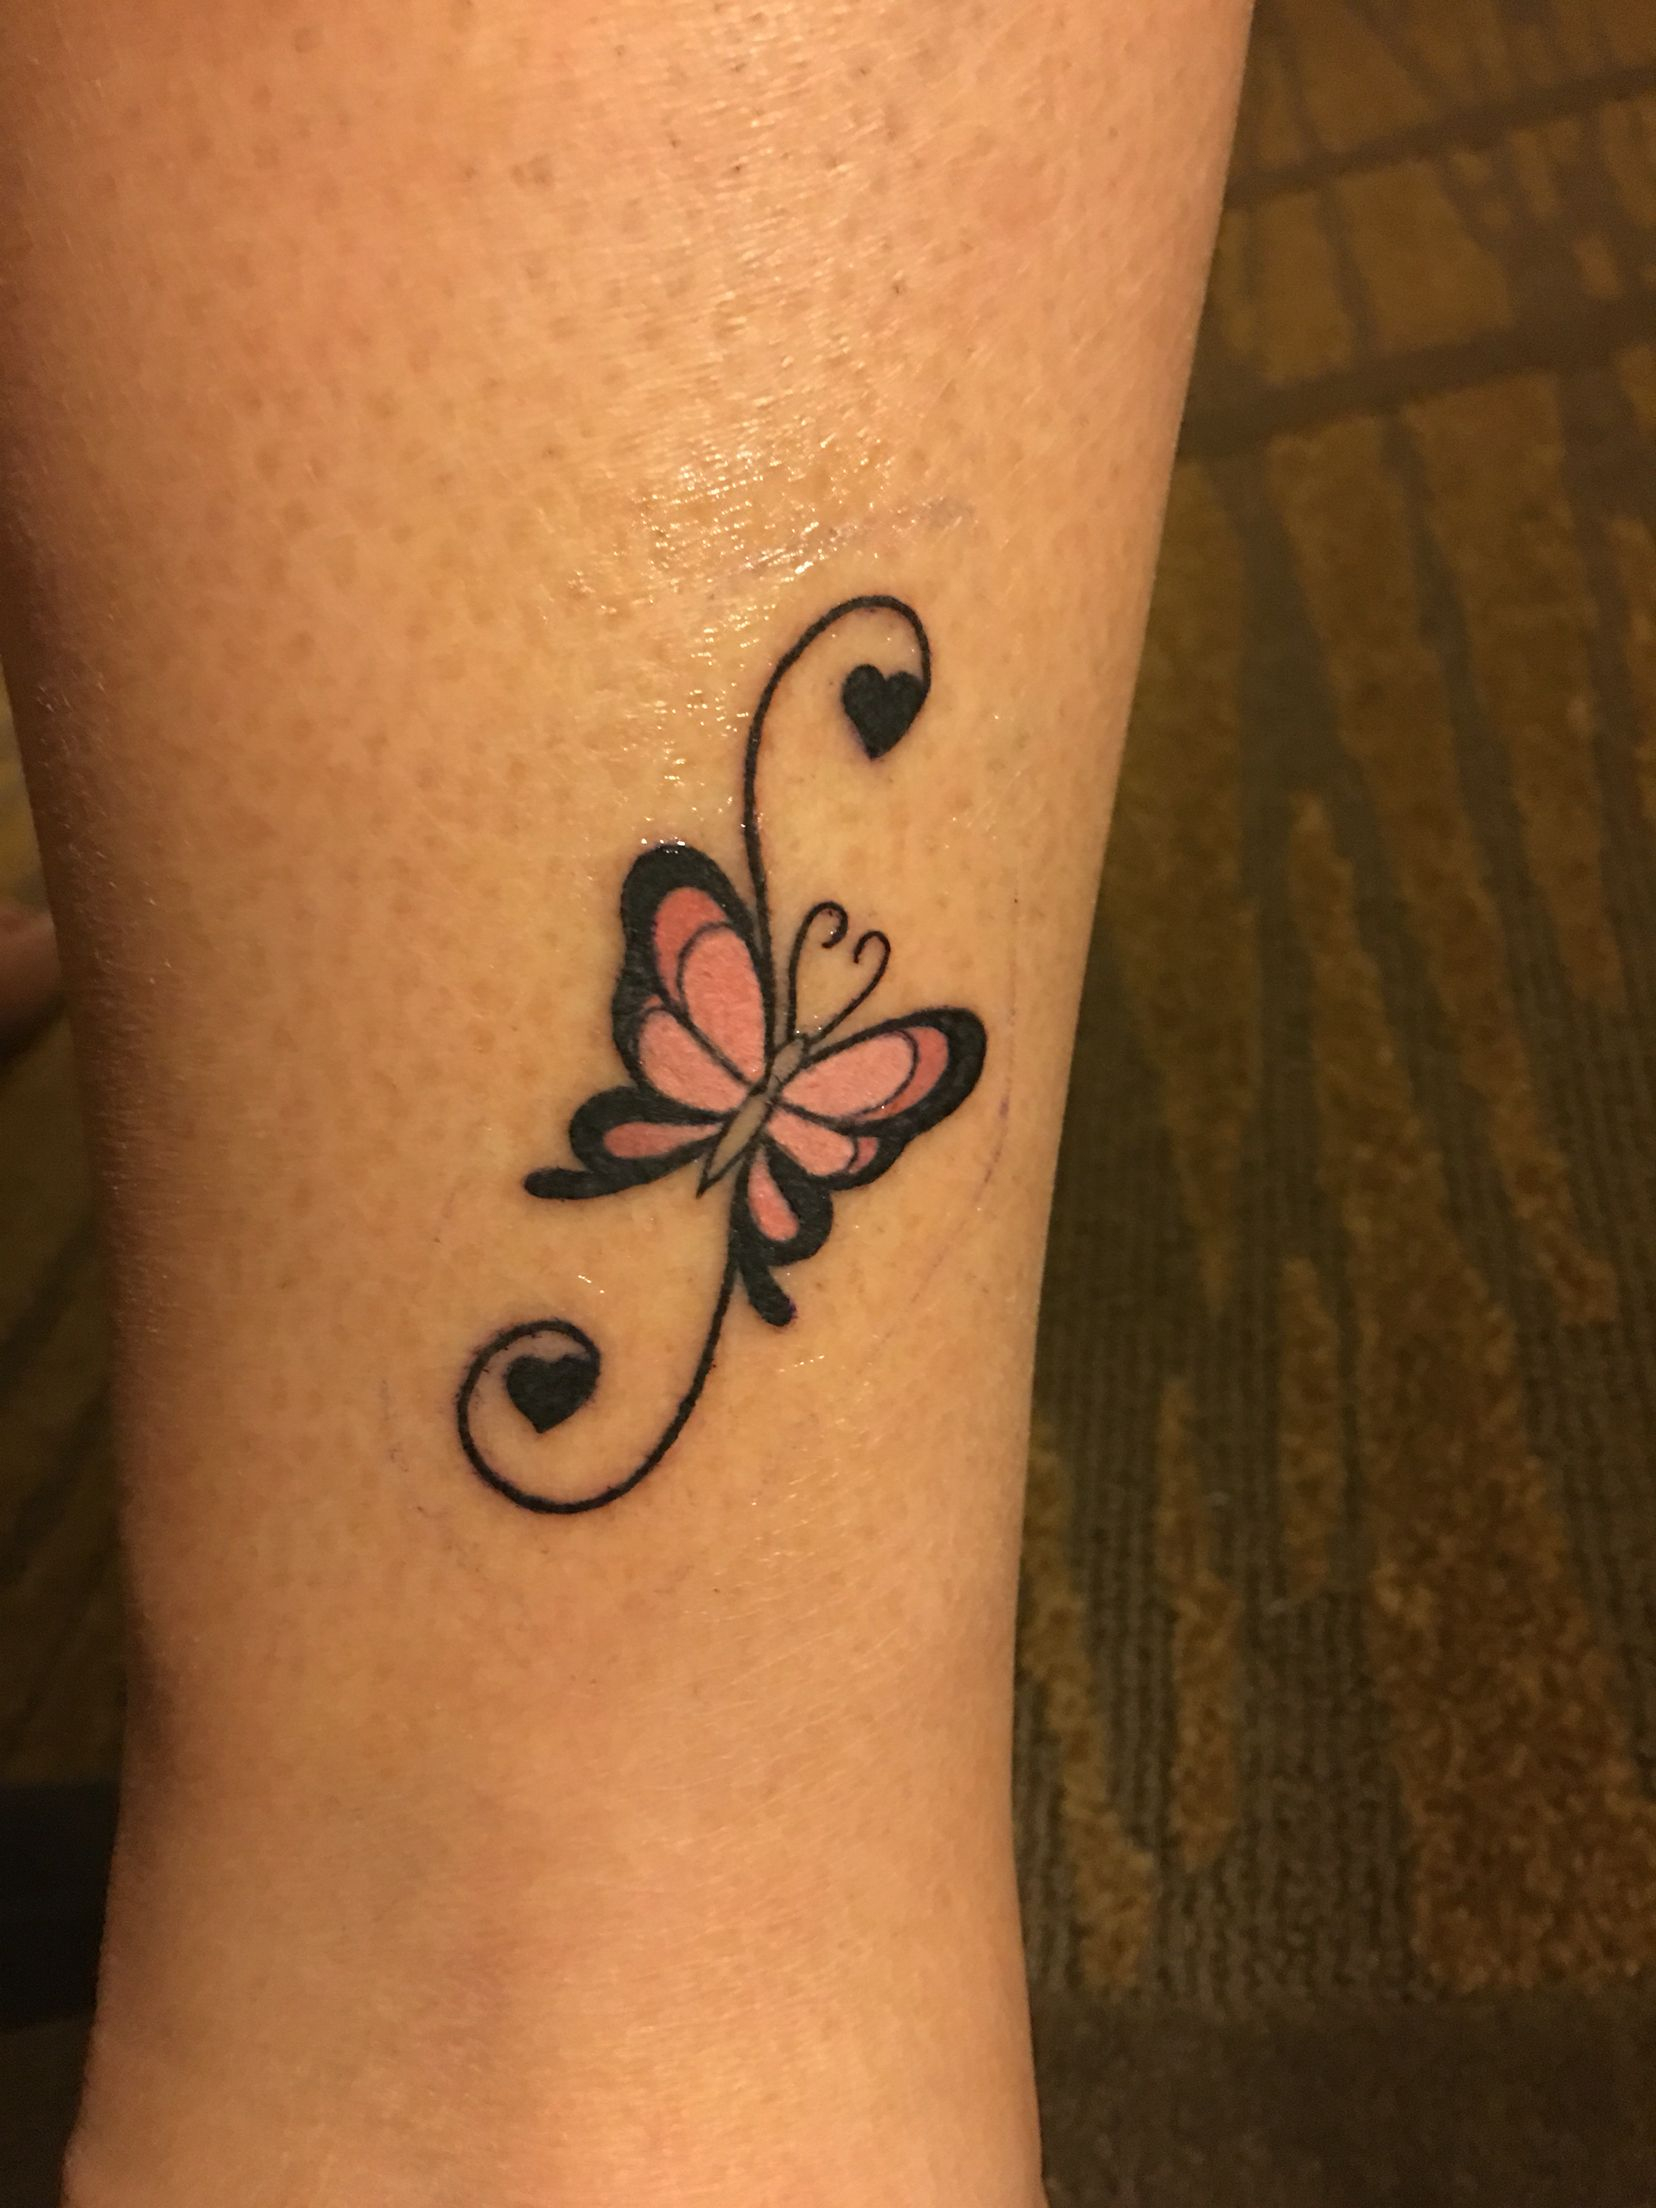 Feminine Butterfly Tattoo The Ankle With Swirls And Hearts The throughout measurements 1656 X 2208